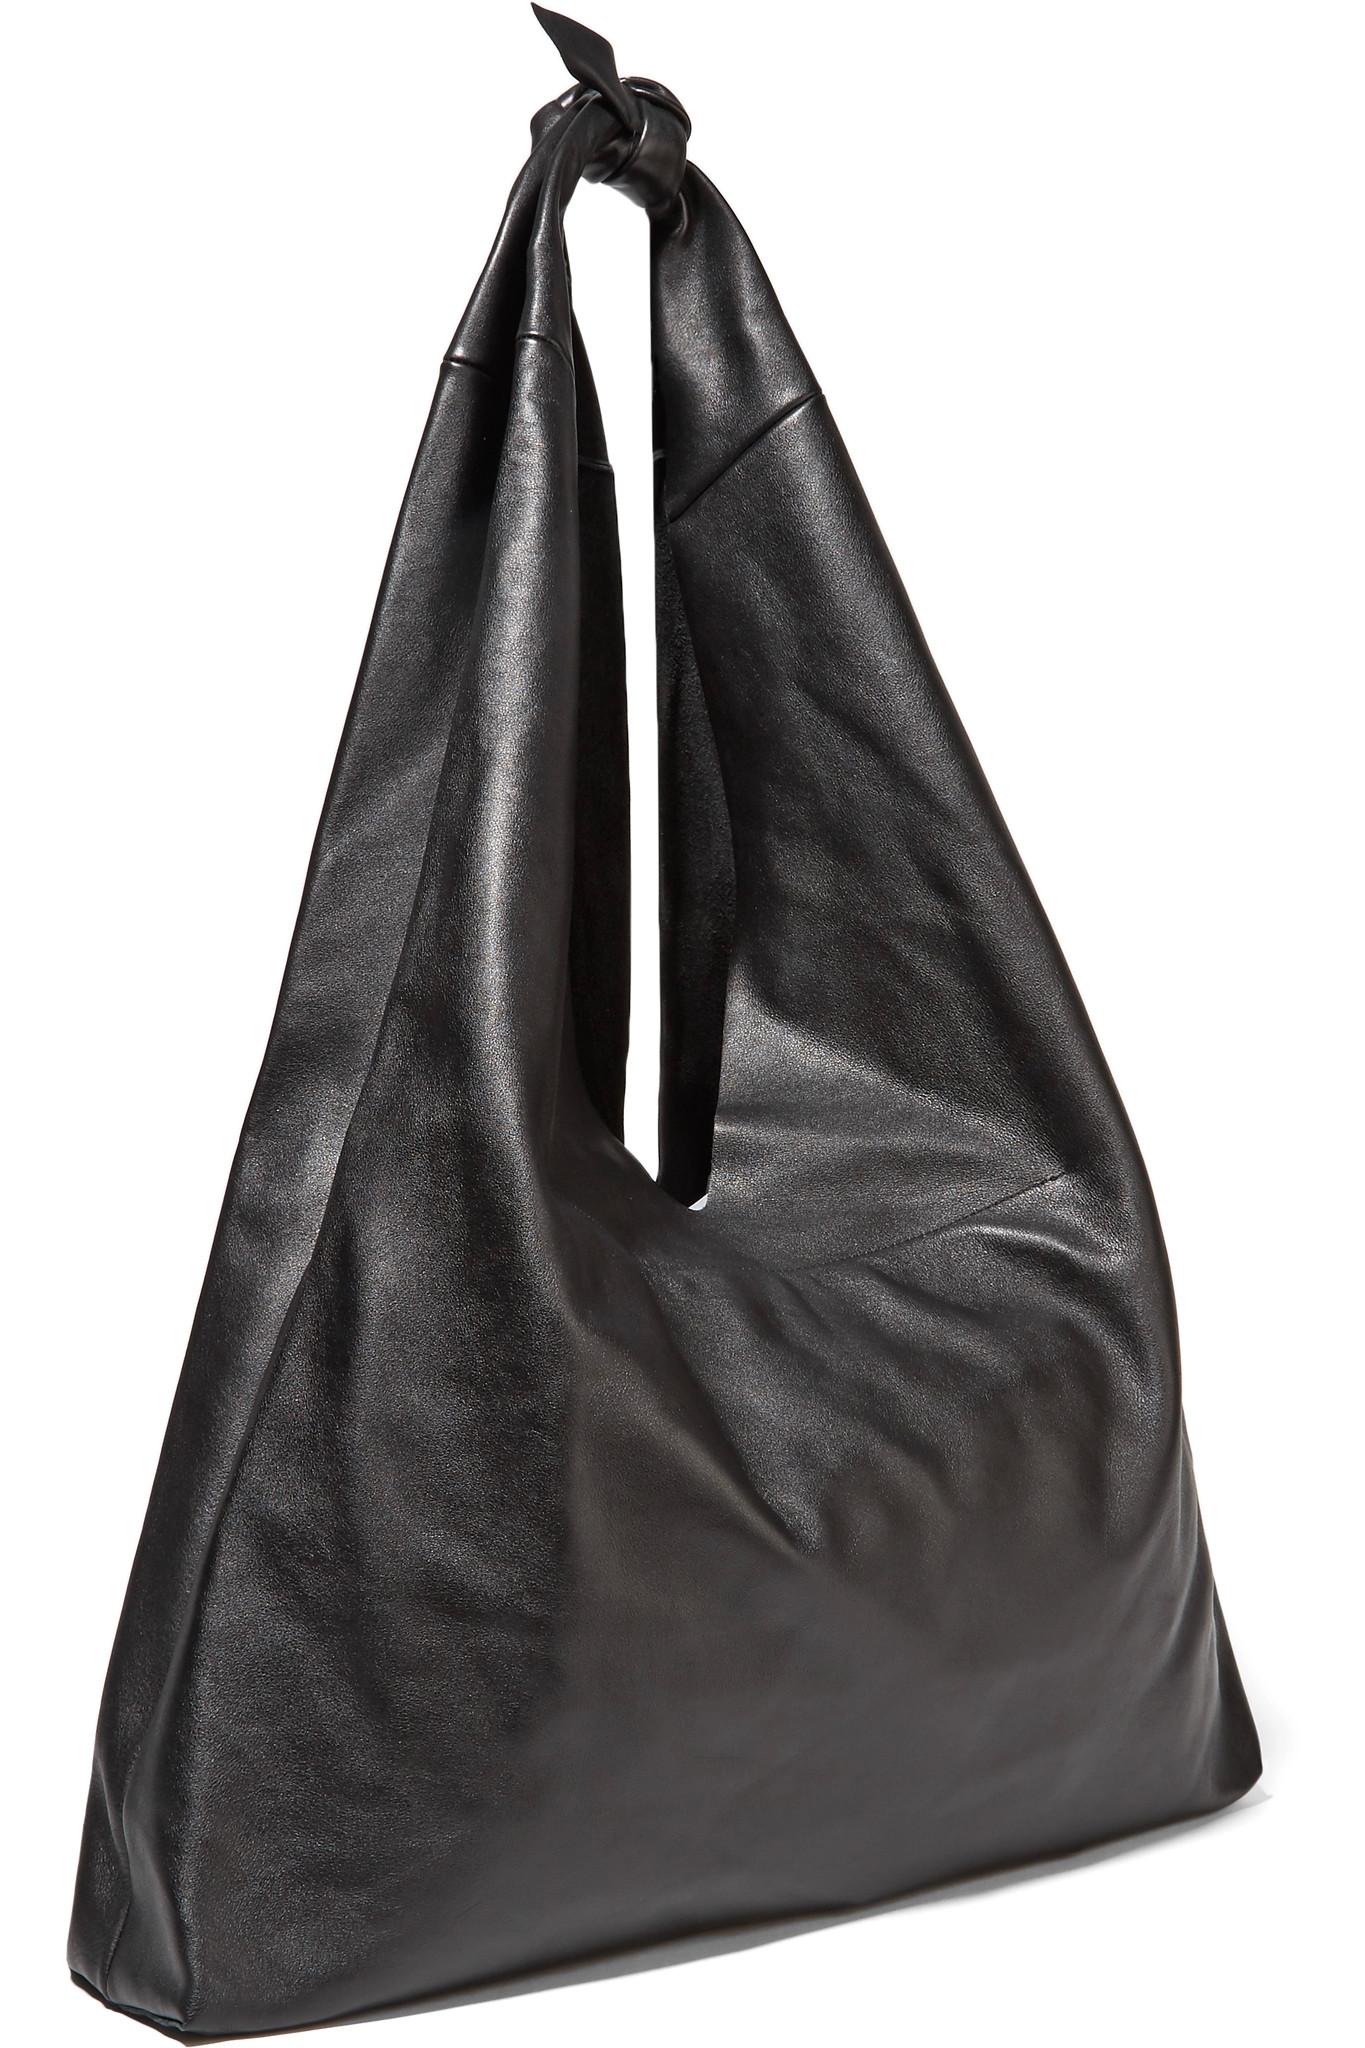 Lyst - The Row Bindle Leather Shoulder Bag in Black